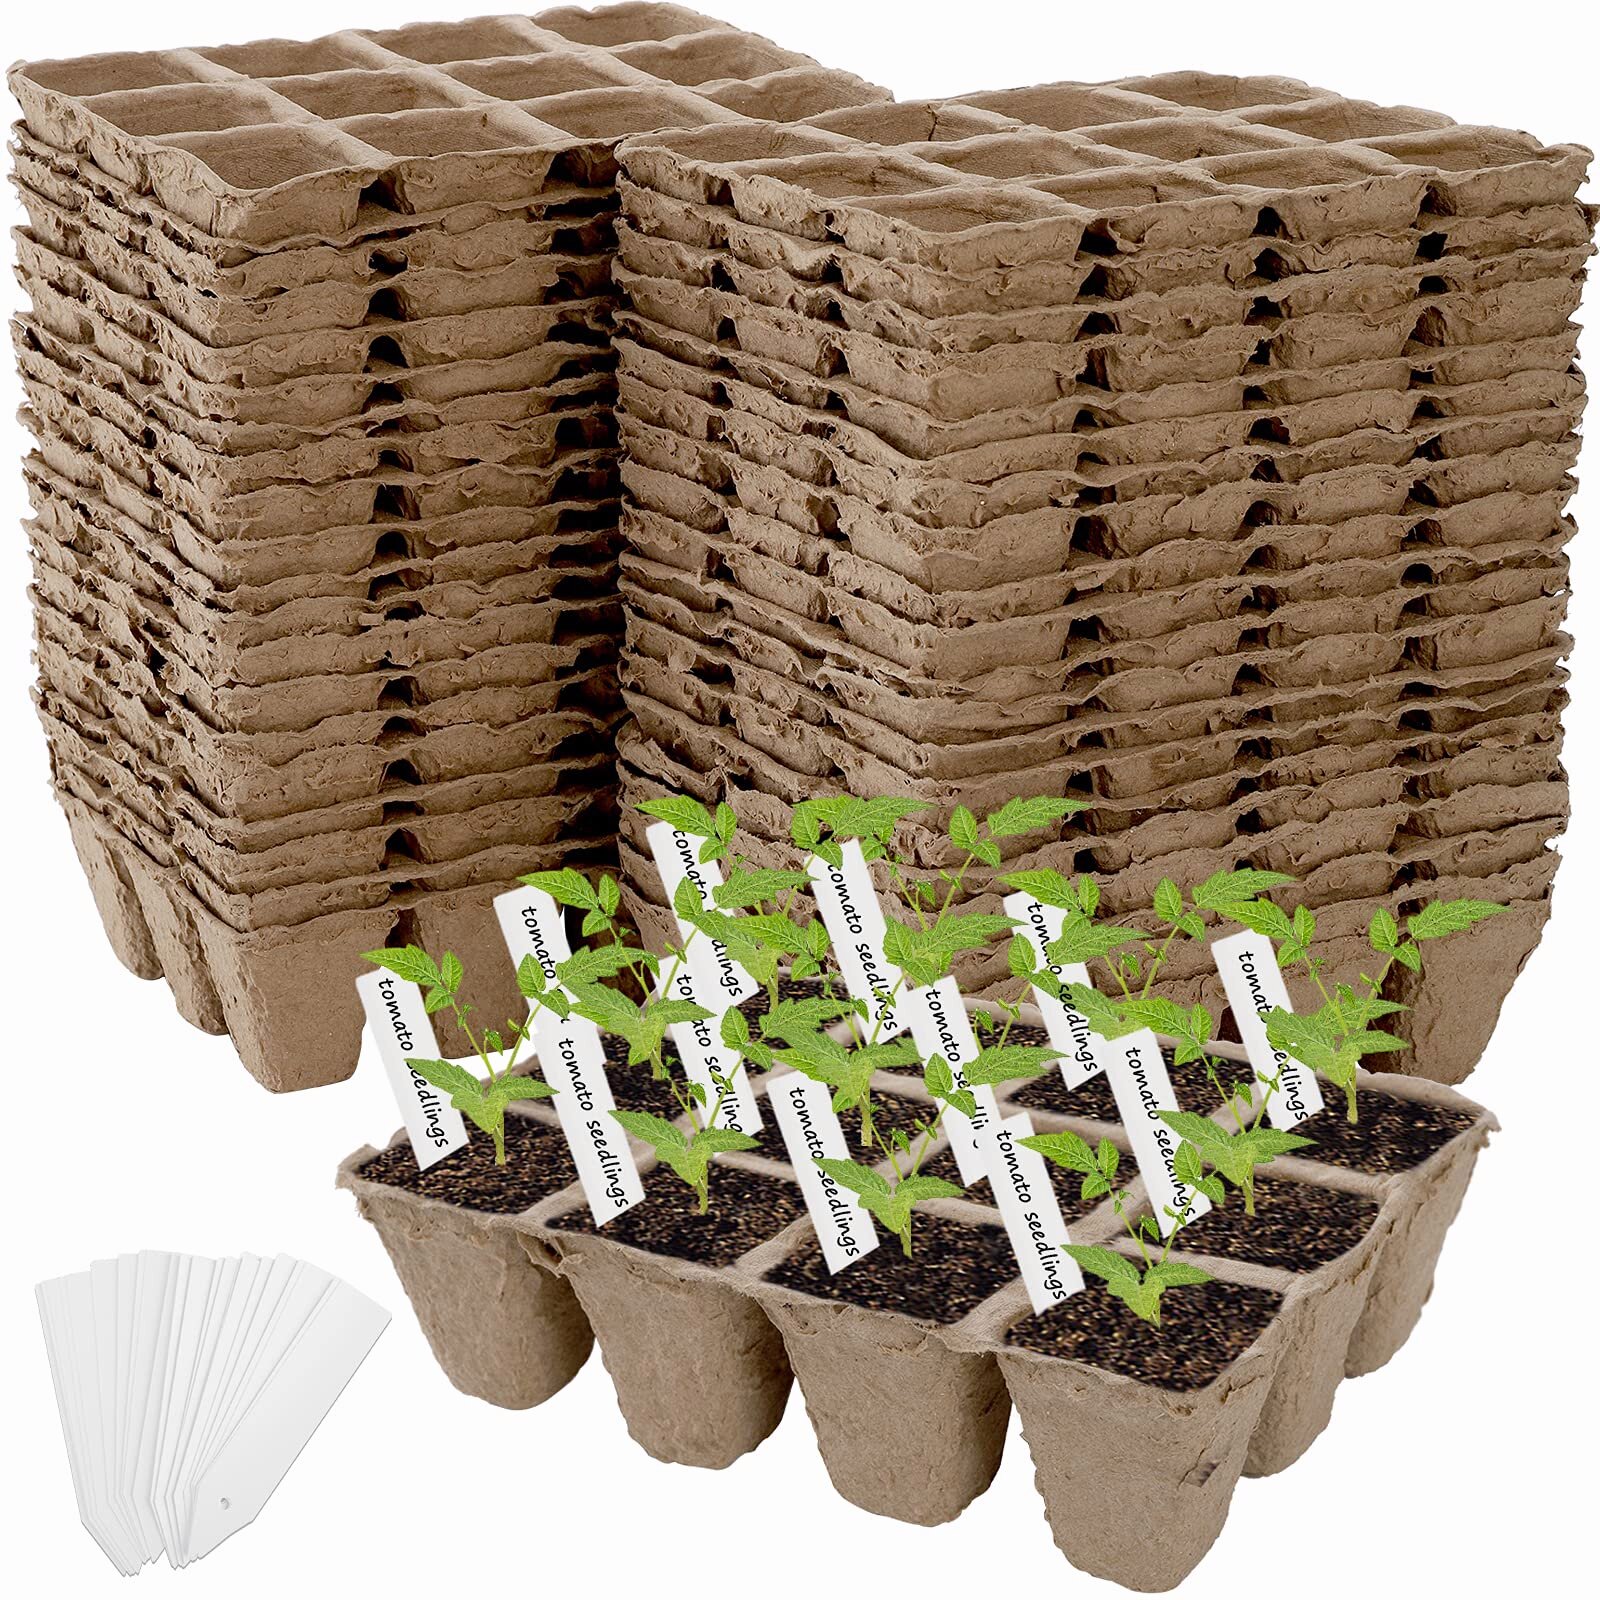 36 Pack Coco Coir Planter Nursery Pots 2.5 Biodegradable Seedling Germination Peat Pot with Bonus 100 Plant Markers Eco-Friendly Plantable Seedlings Pots for Garden Plants Sprouting Transplanting 